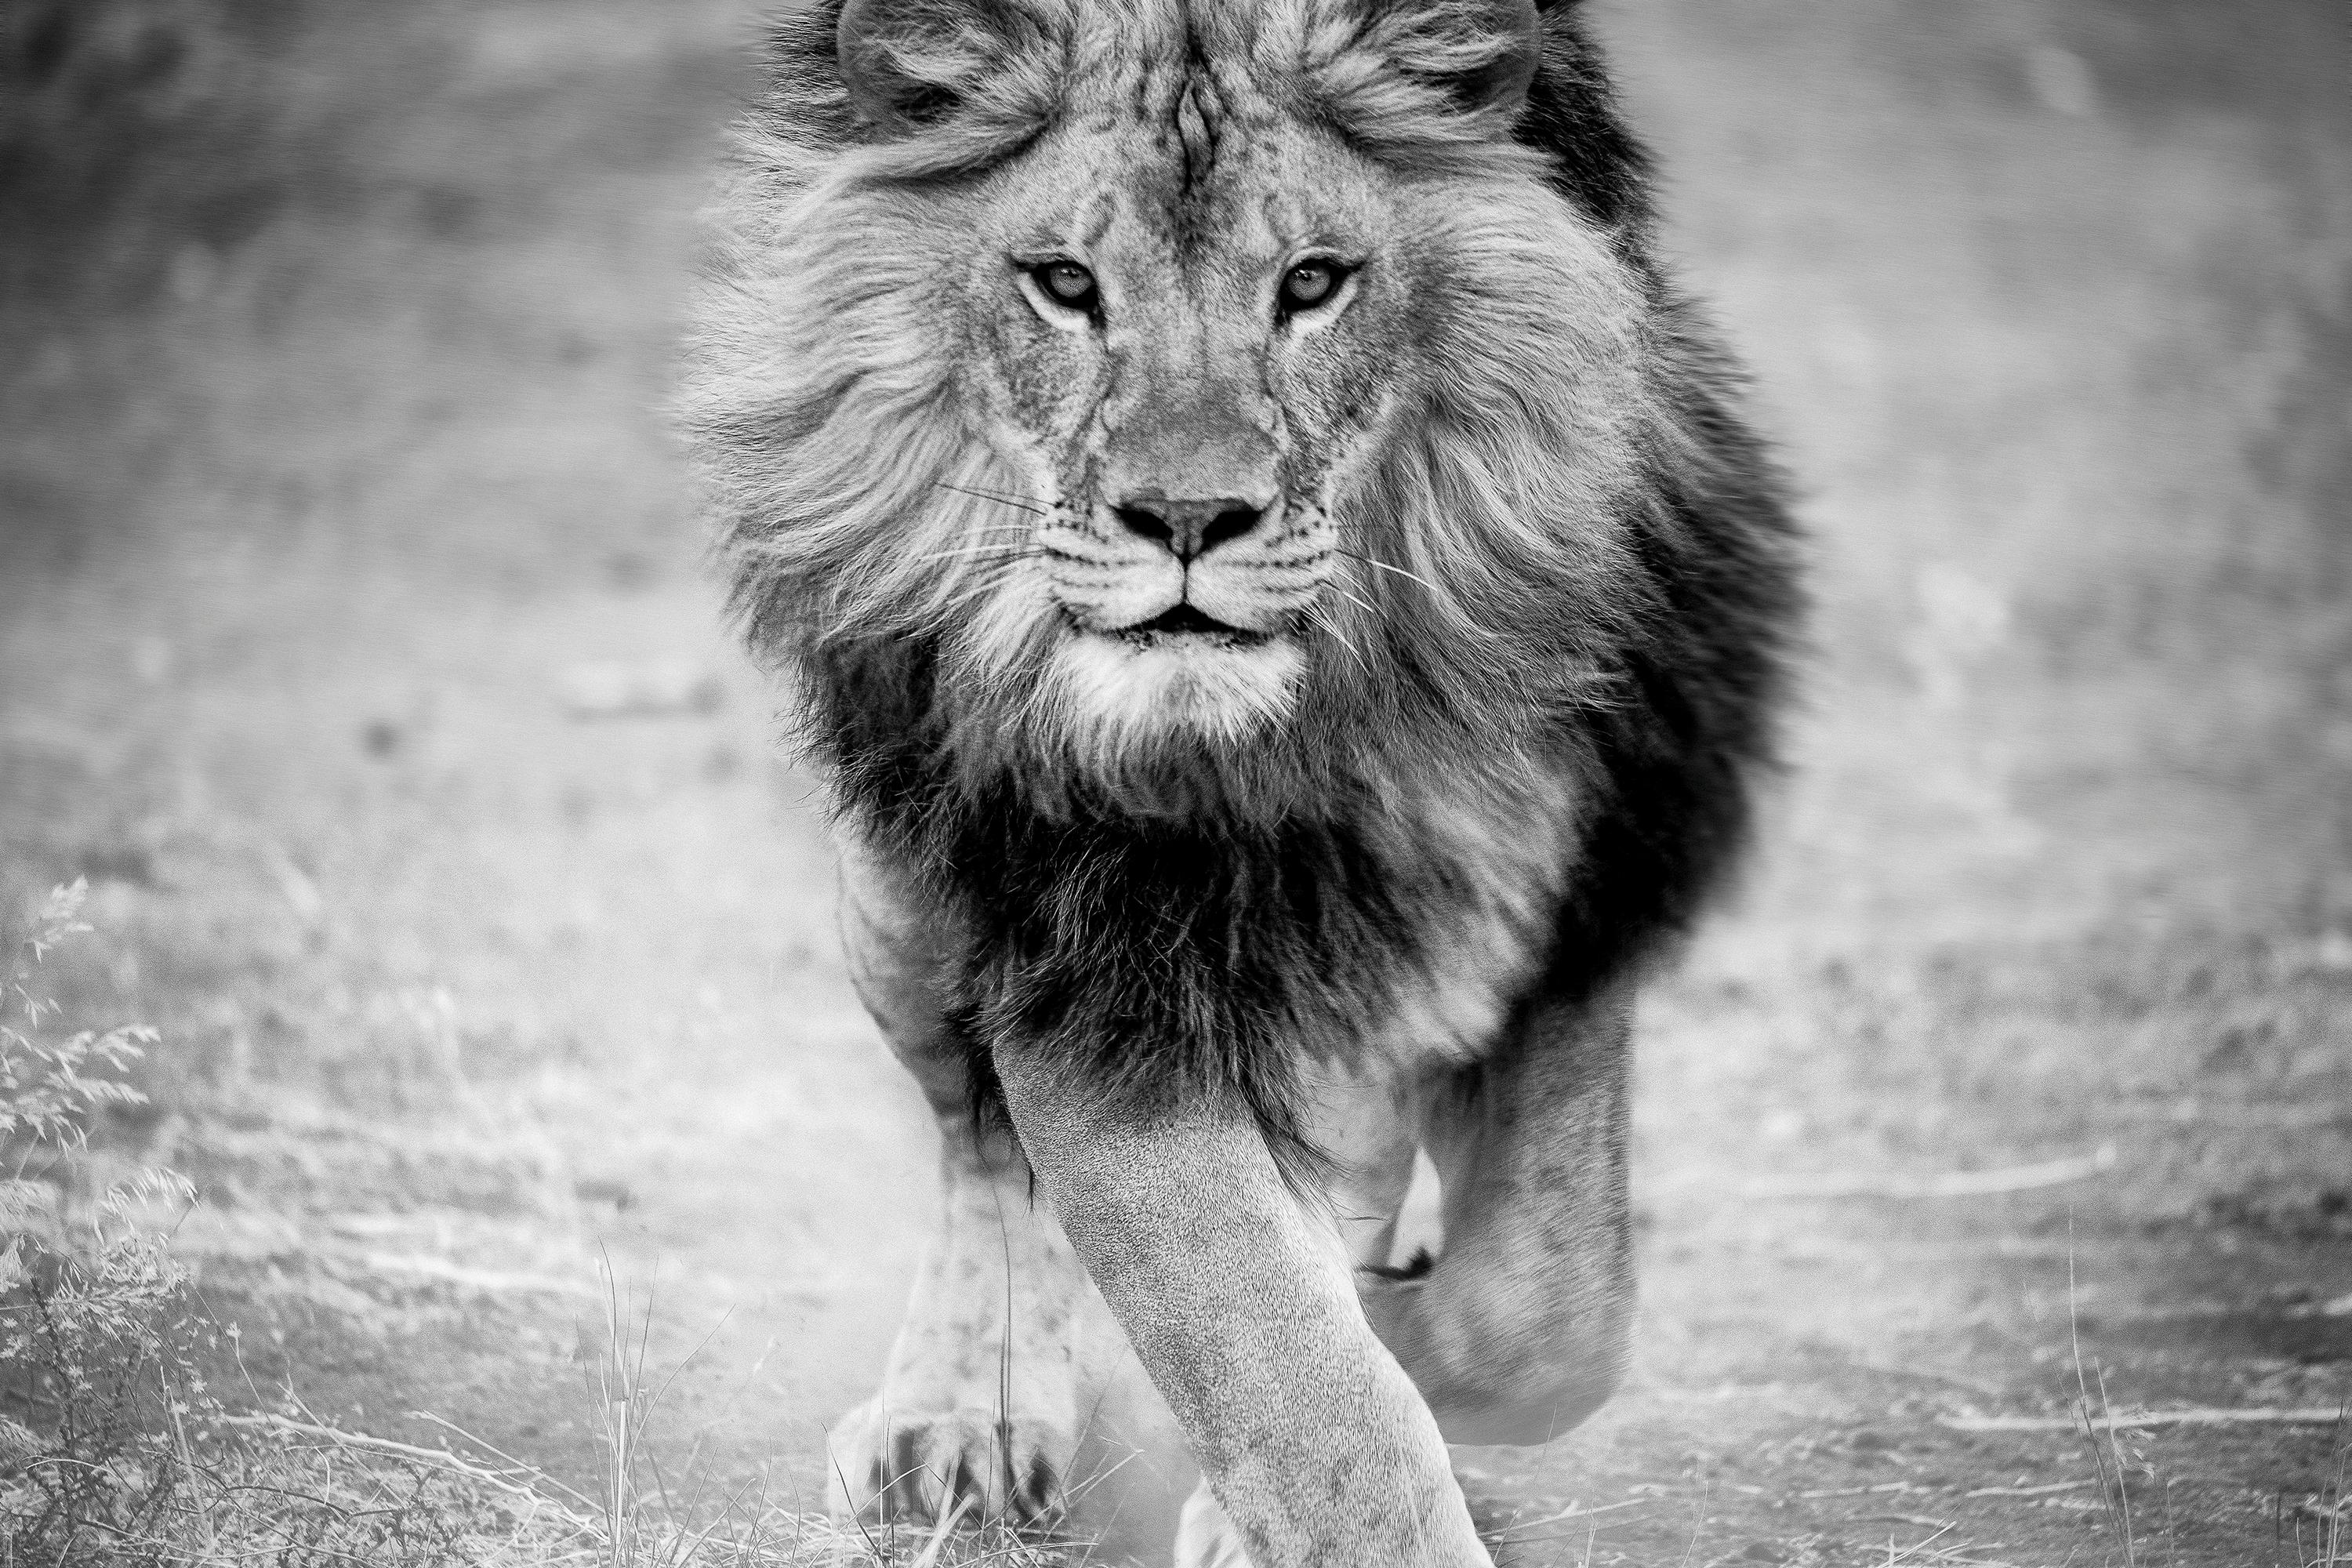 Shane Russeck Black and White Photograph - "Panthera Leo" 36x48 Black and White Lion Photography Photograph  Signed 